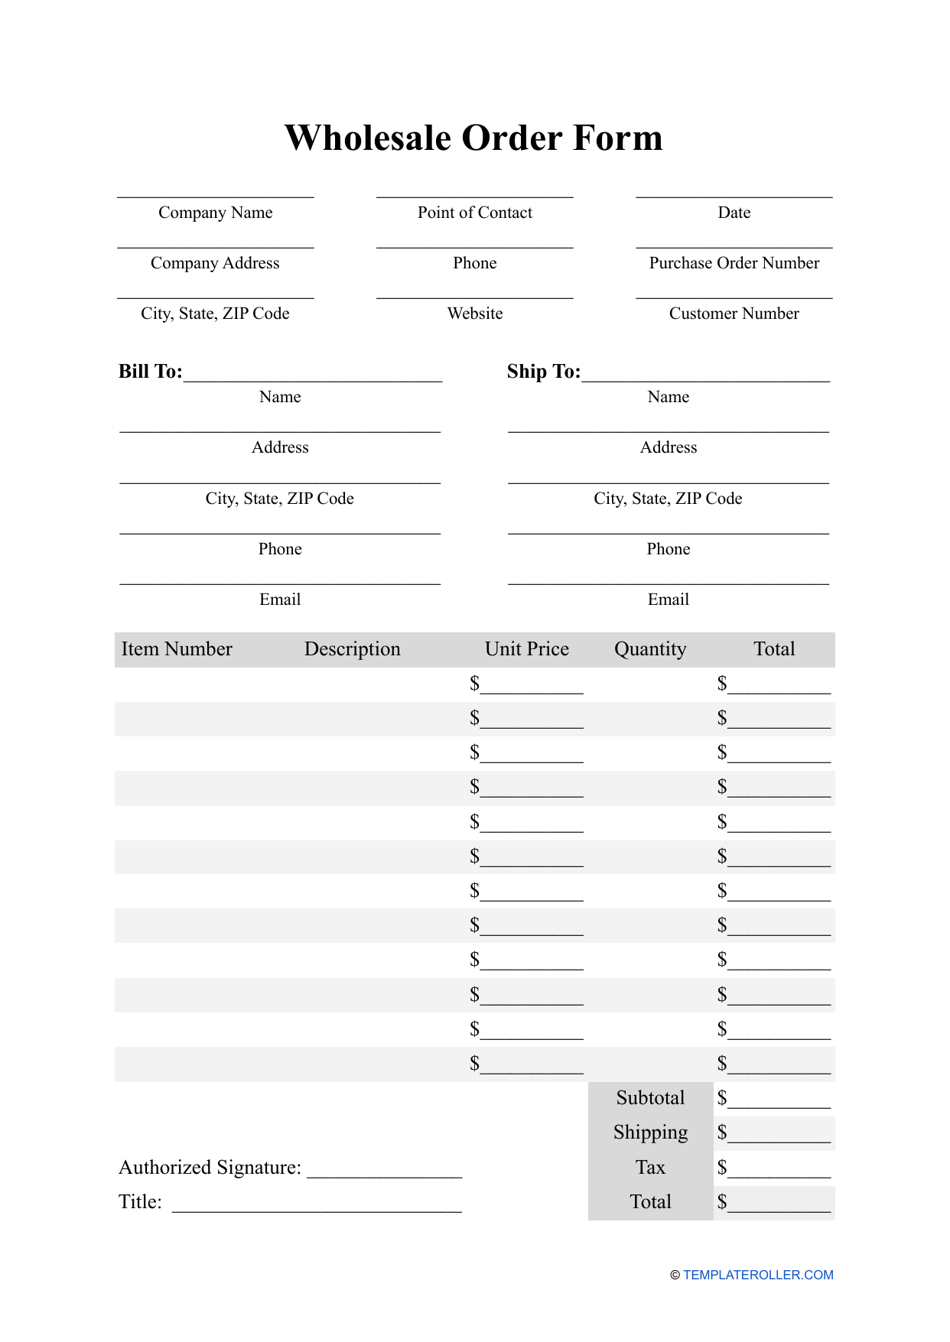 Wholesale Order Form Template, Page 1